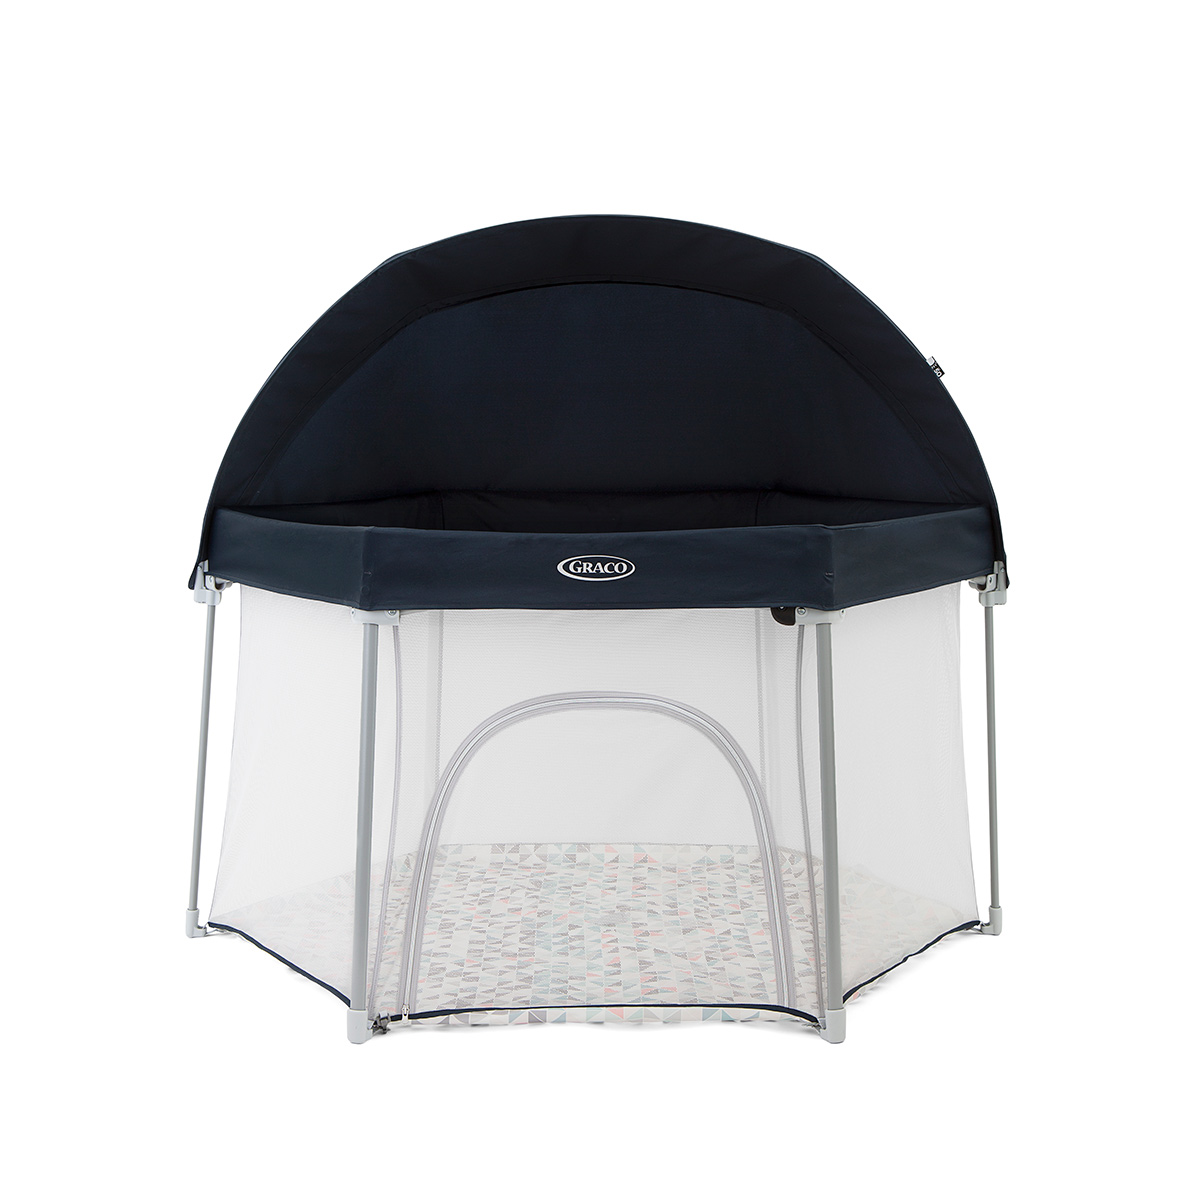 Graco EverGo playpen with canopy front angle on white background.